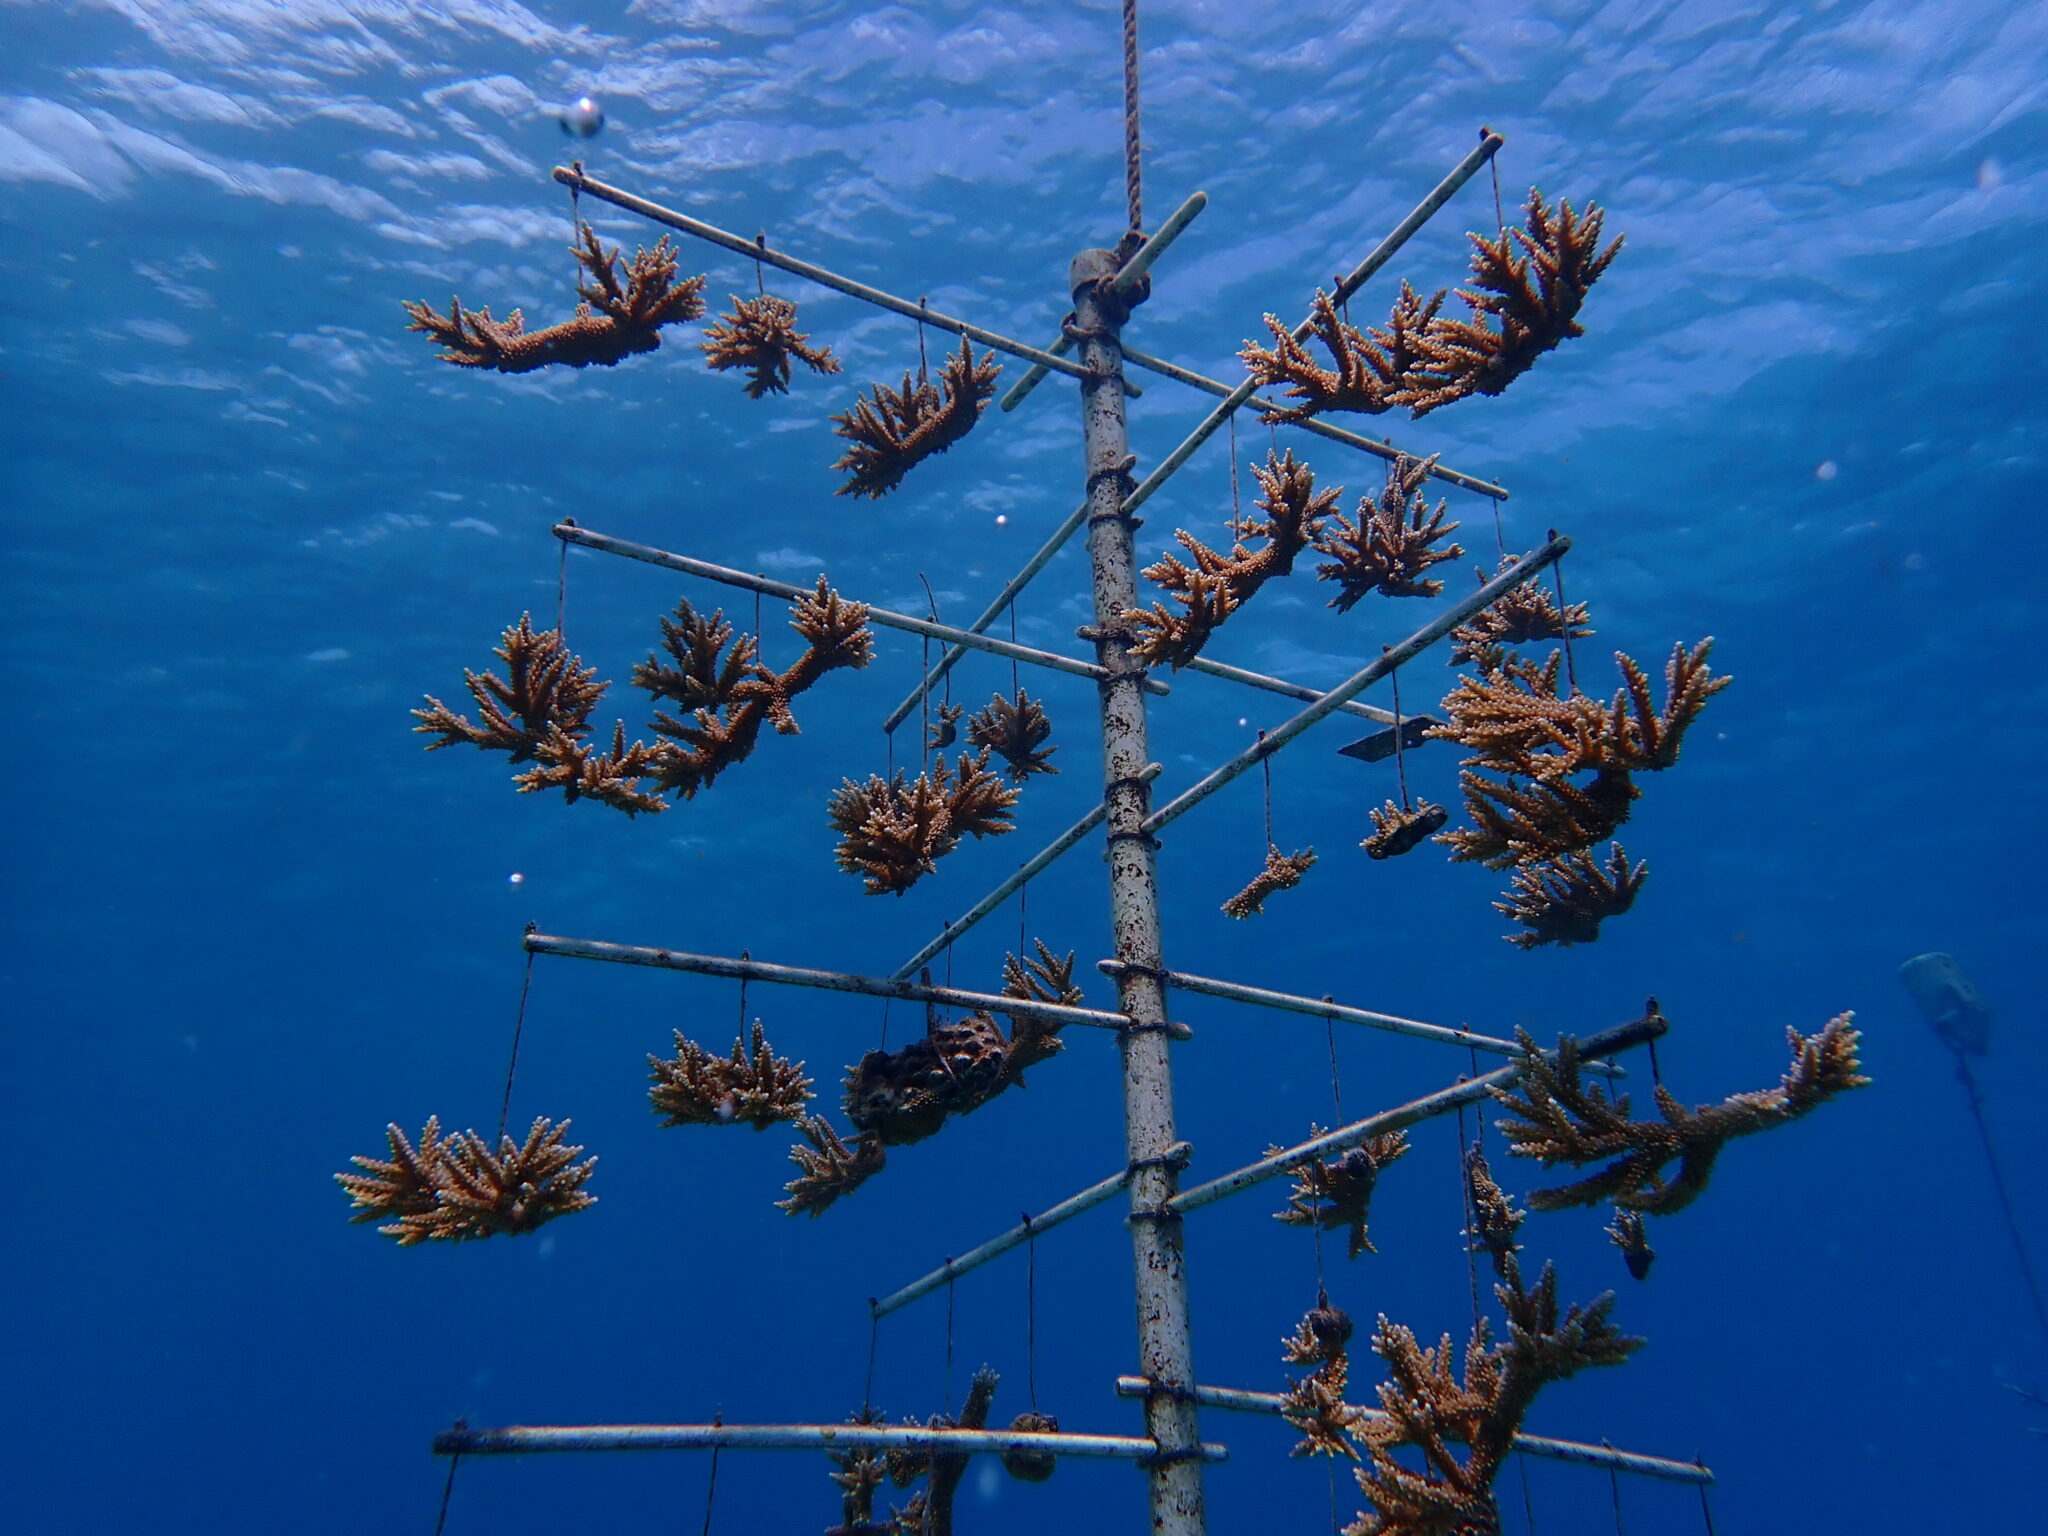 A large branching metal structure holding new coral growth underwater